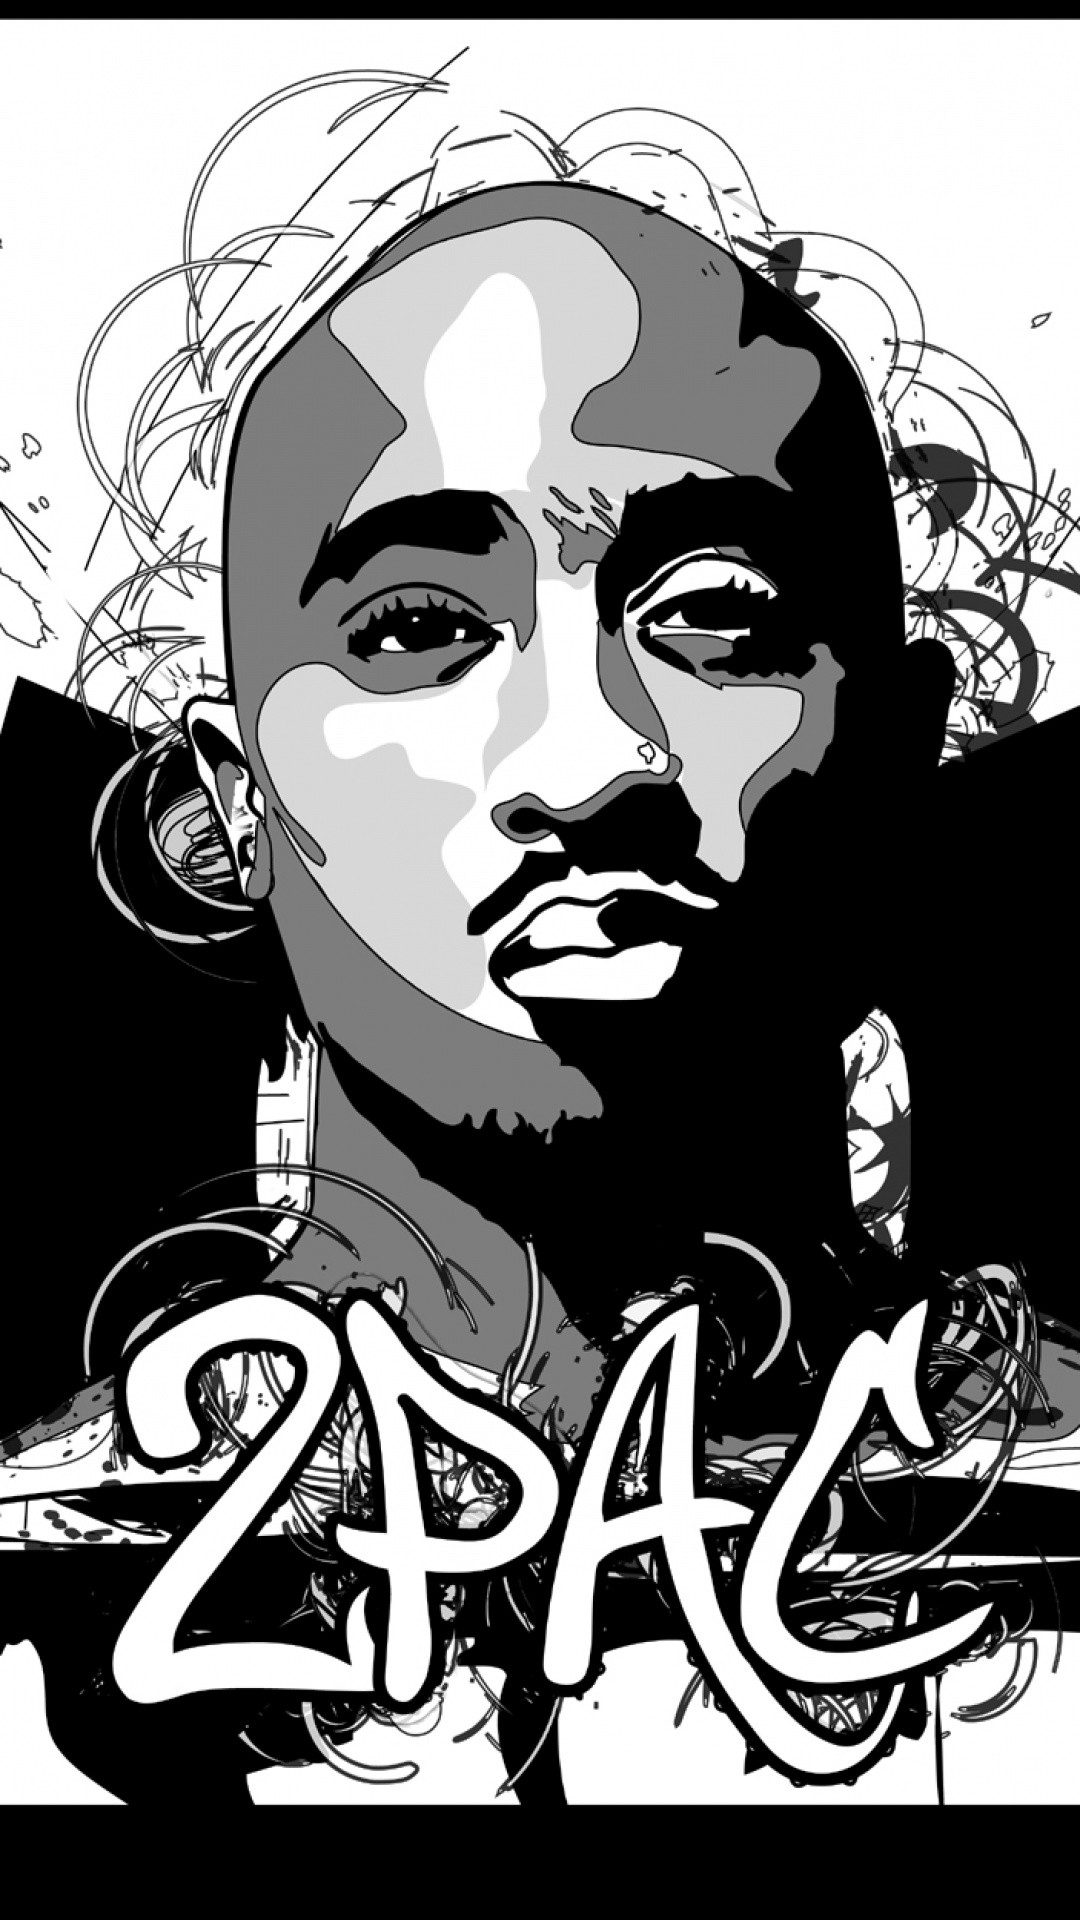 1080x1920 2Pac download wallpaper for iPhone